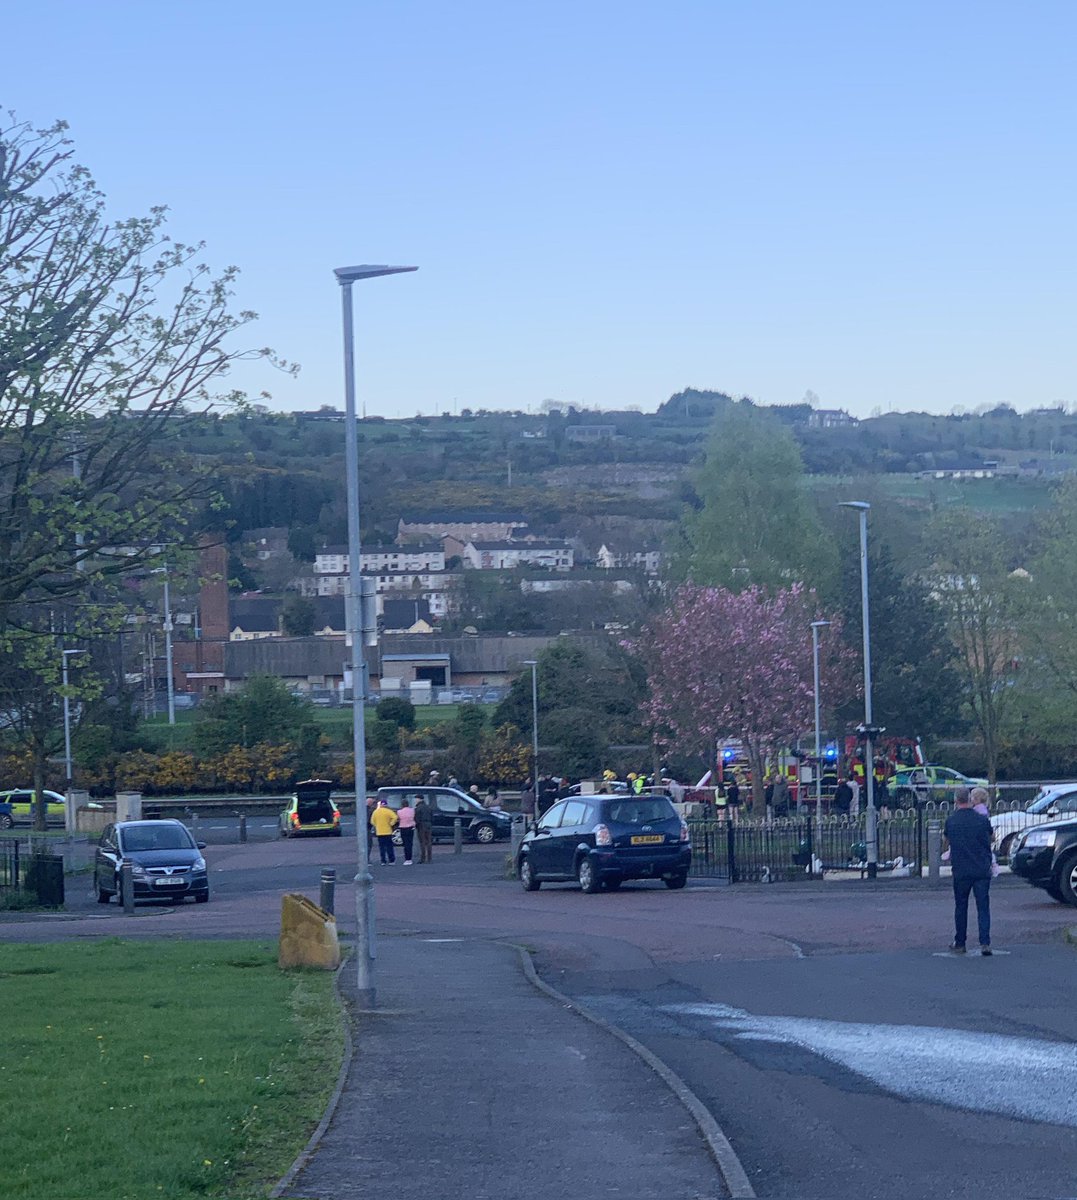 The PSNI and the Northern Ireland Fire and Rescue Service are currently attending an incident at the Fathom Line/Quayside Close region of #Newry. The public is advised to avoid the area if possible.